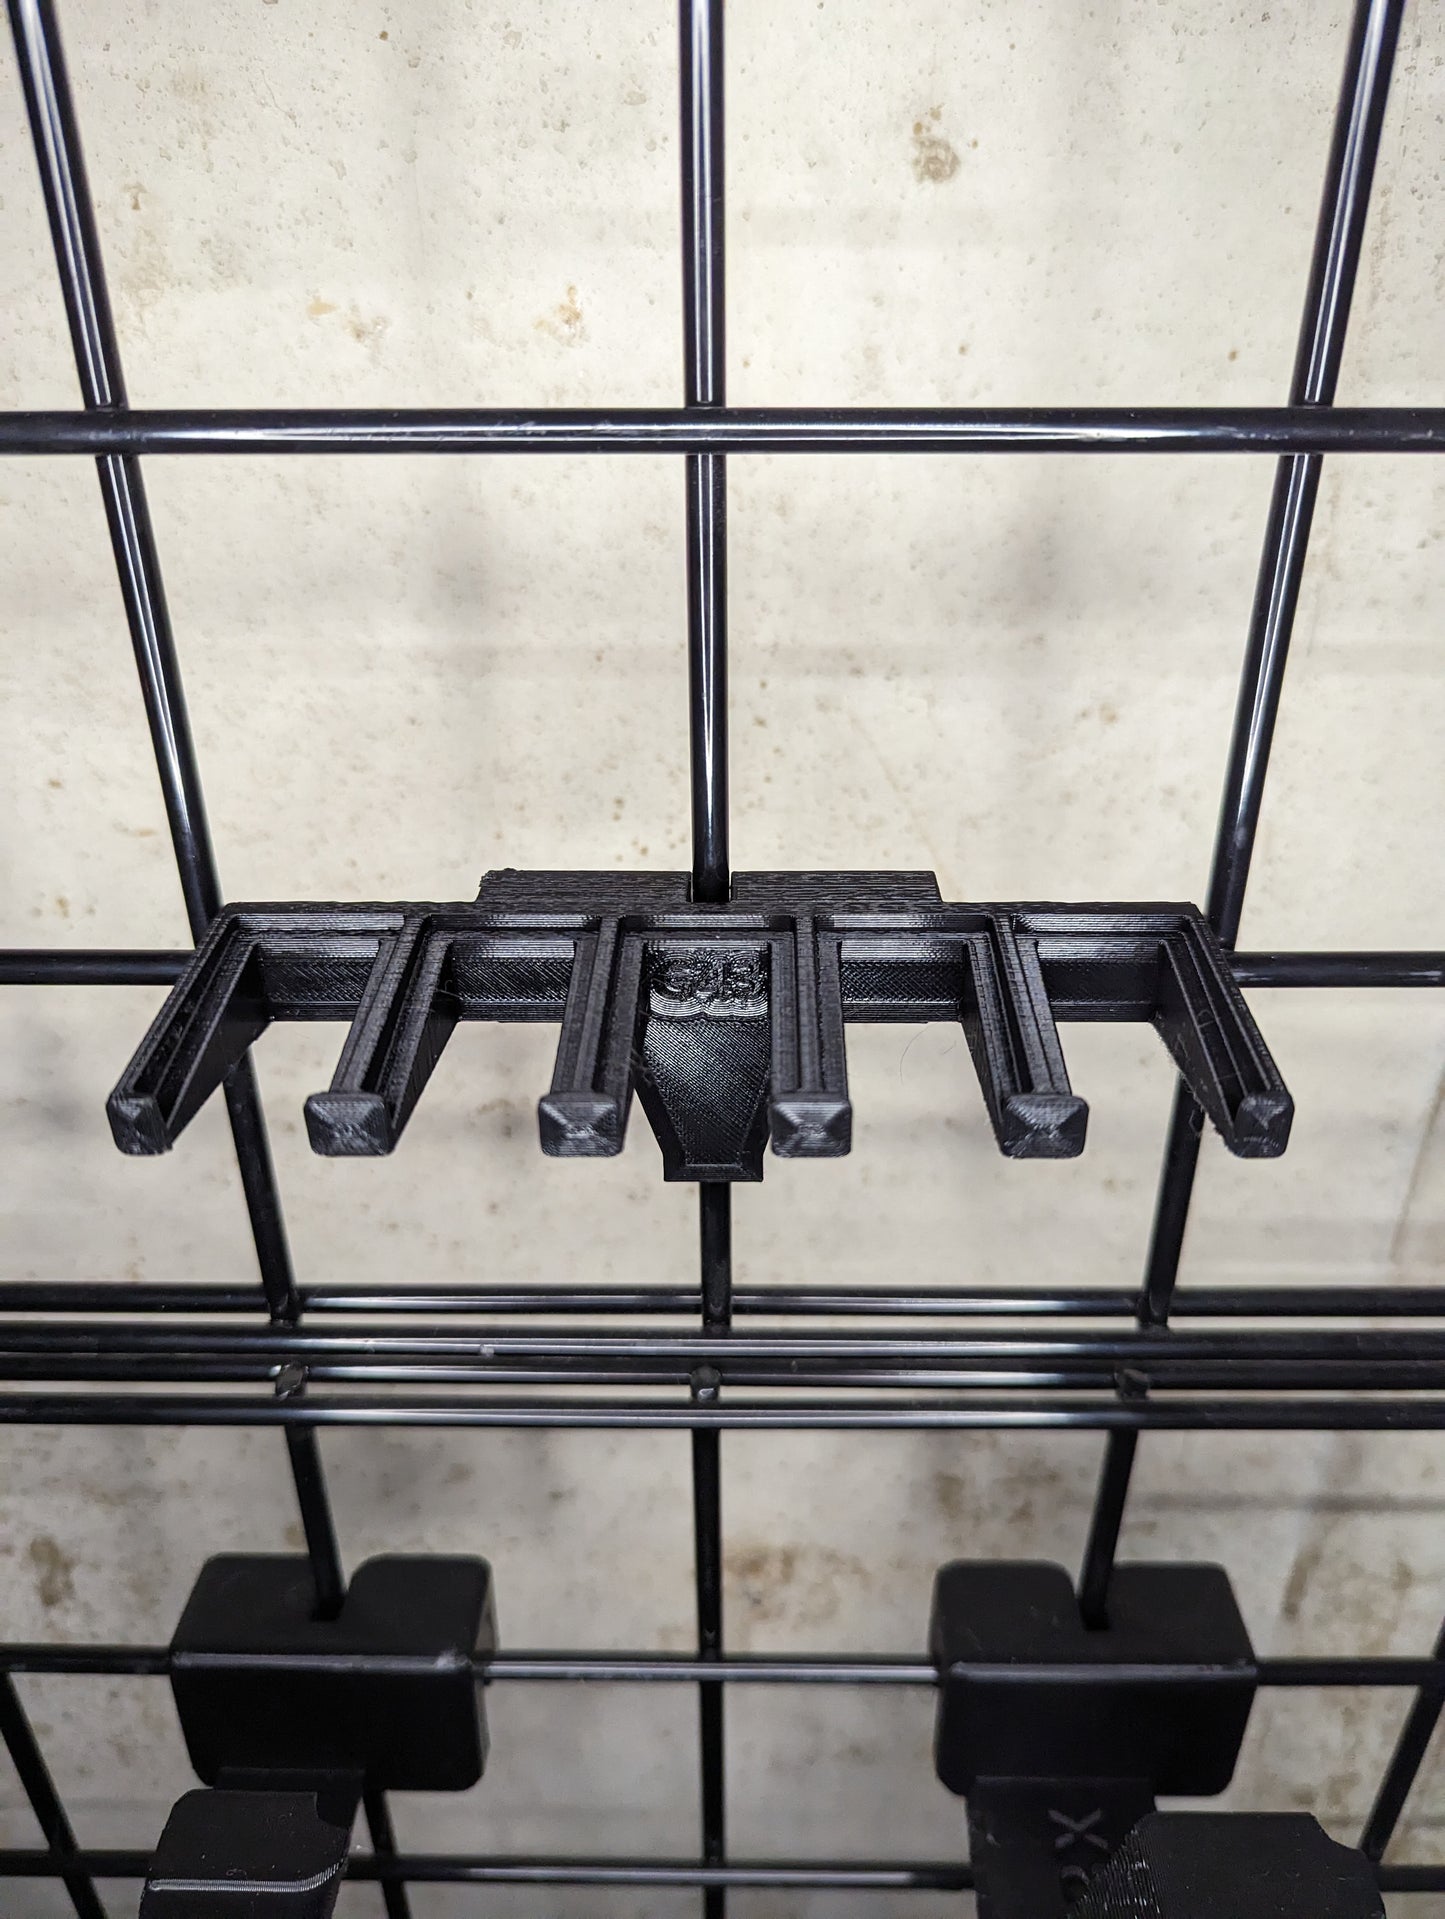 Mount for Glock 43 Mags - Gridwall | Magazine Holder Storage Rack